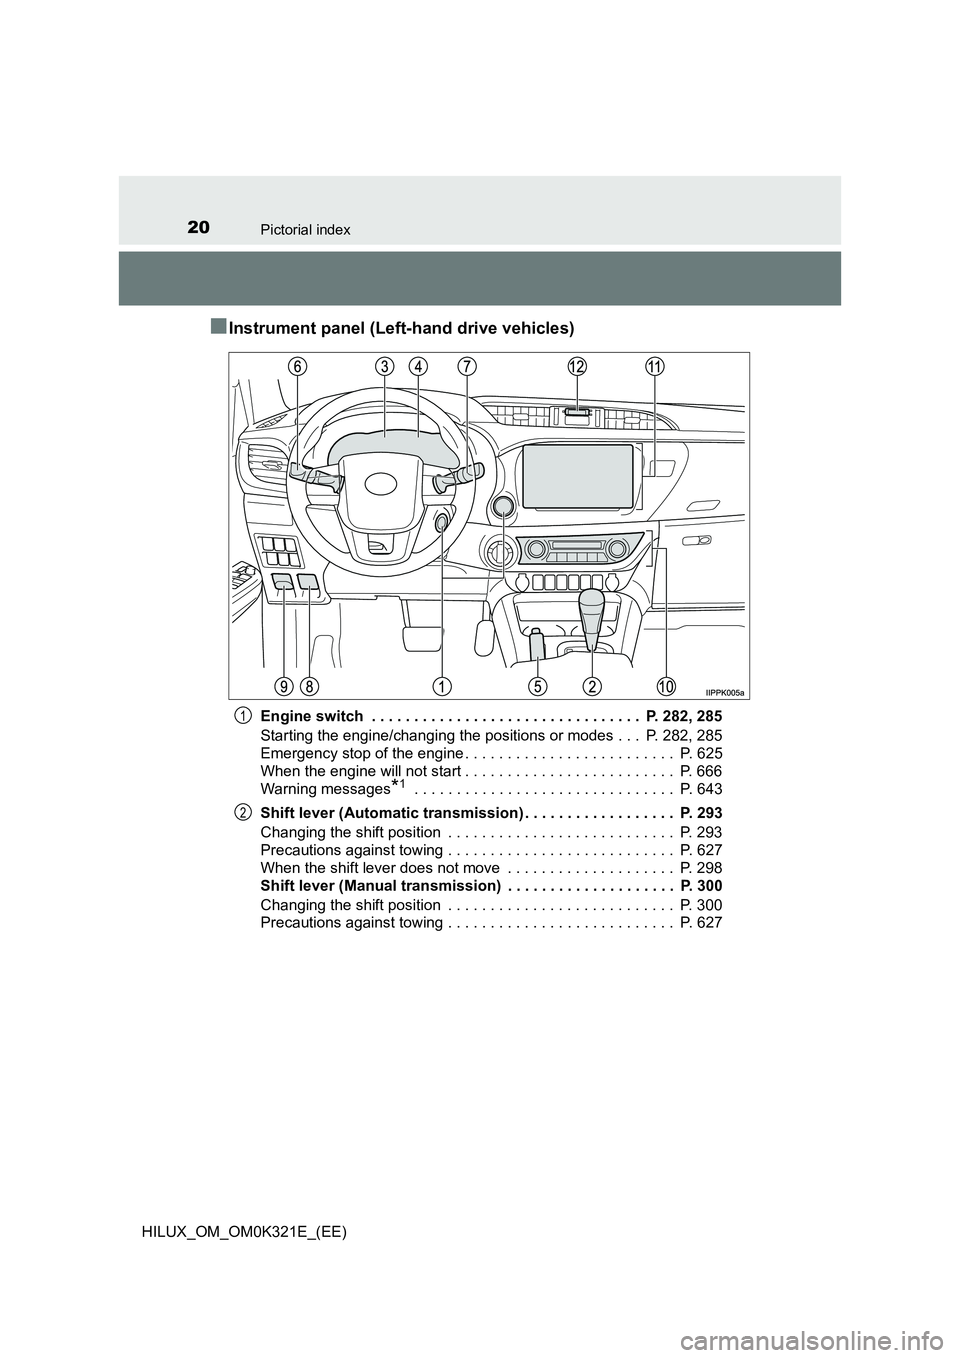 TOYOTA HILUX 2020  Owners Manual (in English) 20Pictorial index
HILUX_OM_OM0K321E_(EE)
■Instrument panel (Left-hand drive vehicles)
Engine switch  . . . . . . . . . . . . . . . . . . . . . . . . . . . . . . . .  P. 282, 285 
Starting the engine